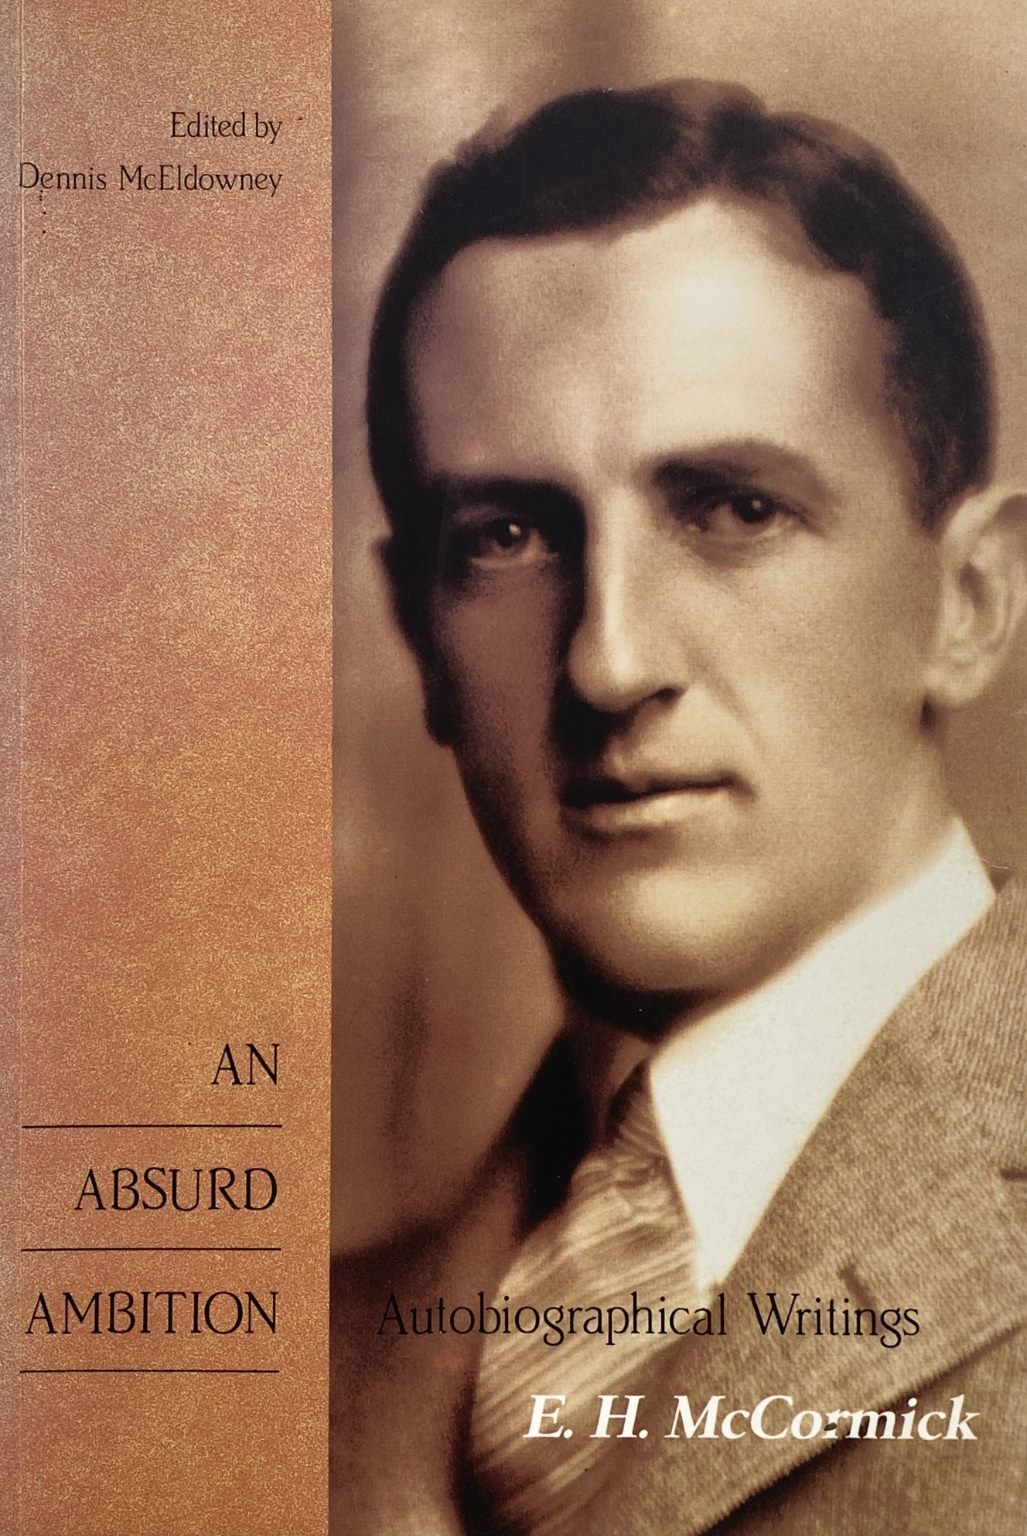 AN ABSURD AMBITION: A biography of Eric H. McCormick